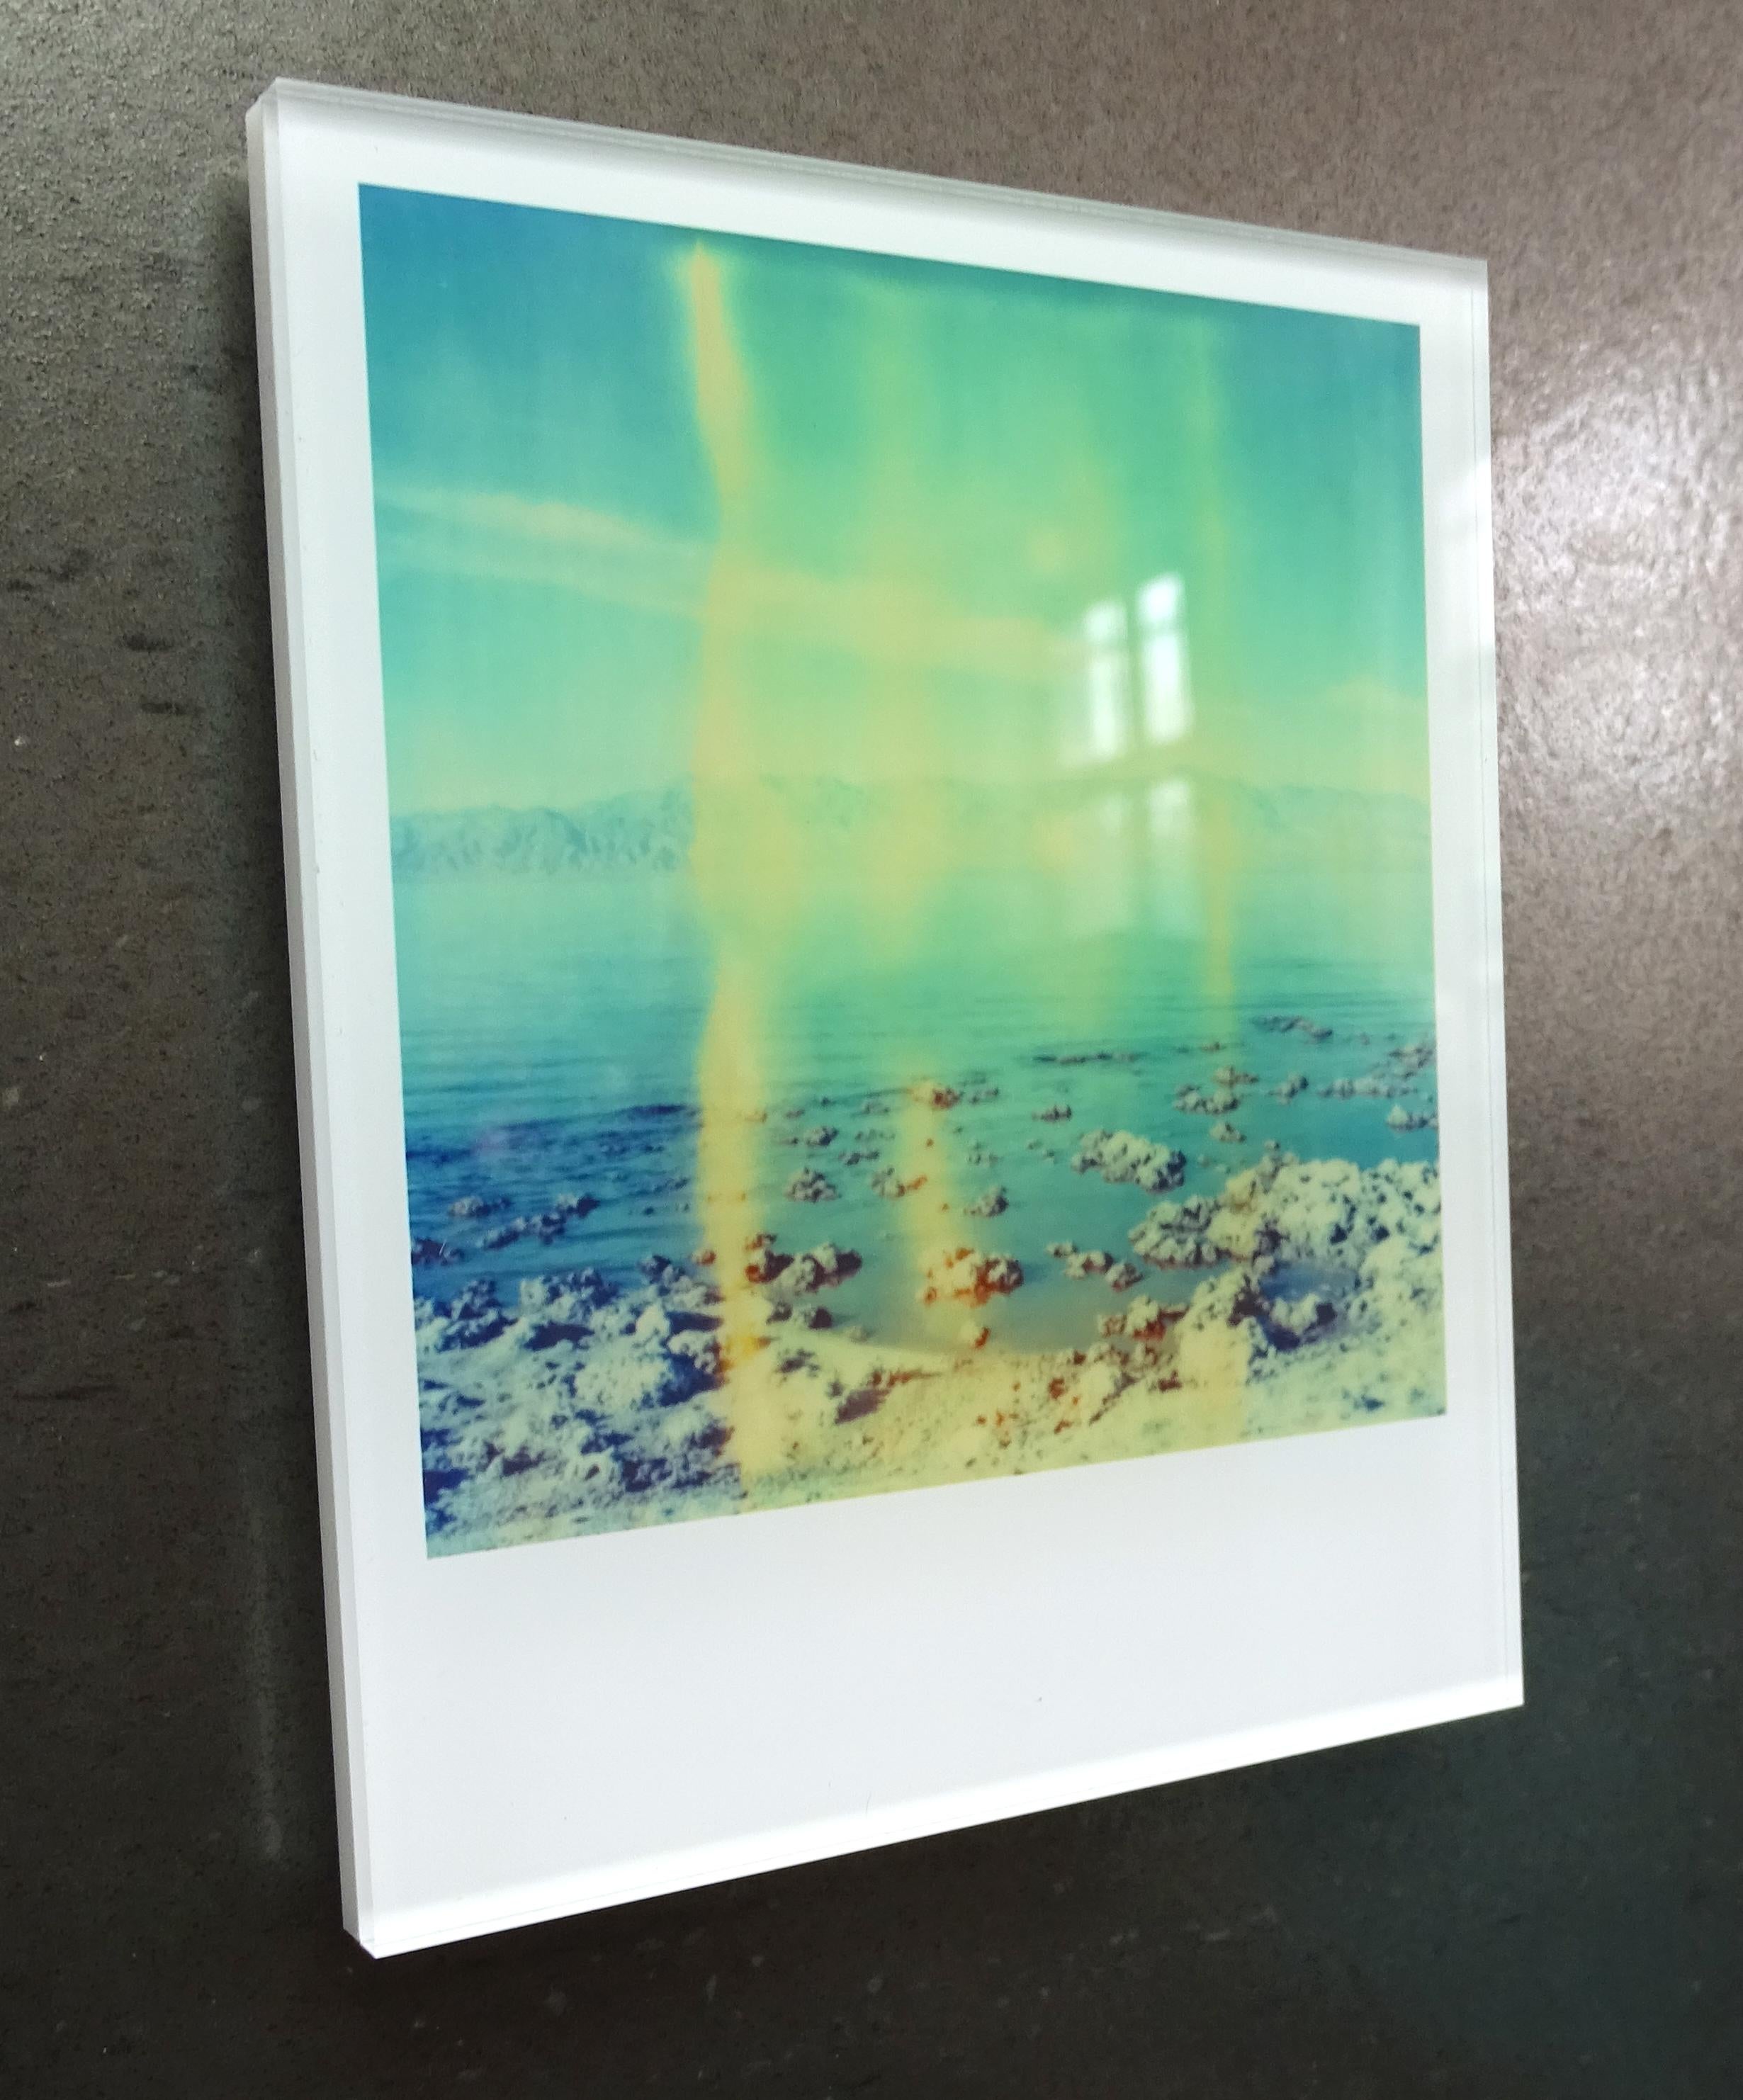 Stefanie Schneider's Minis
Salt'n Sea (California Badlands), 2010

Signed and signature brand on verso.
Lambda digital Color Photographs based on a Polaroid.
Sandwiched in between Plexiglass (thickness 0.7cm)

Polaroid sized open Editions